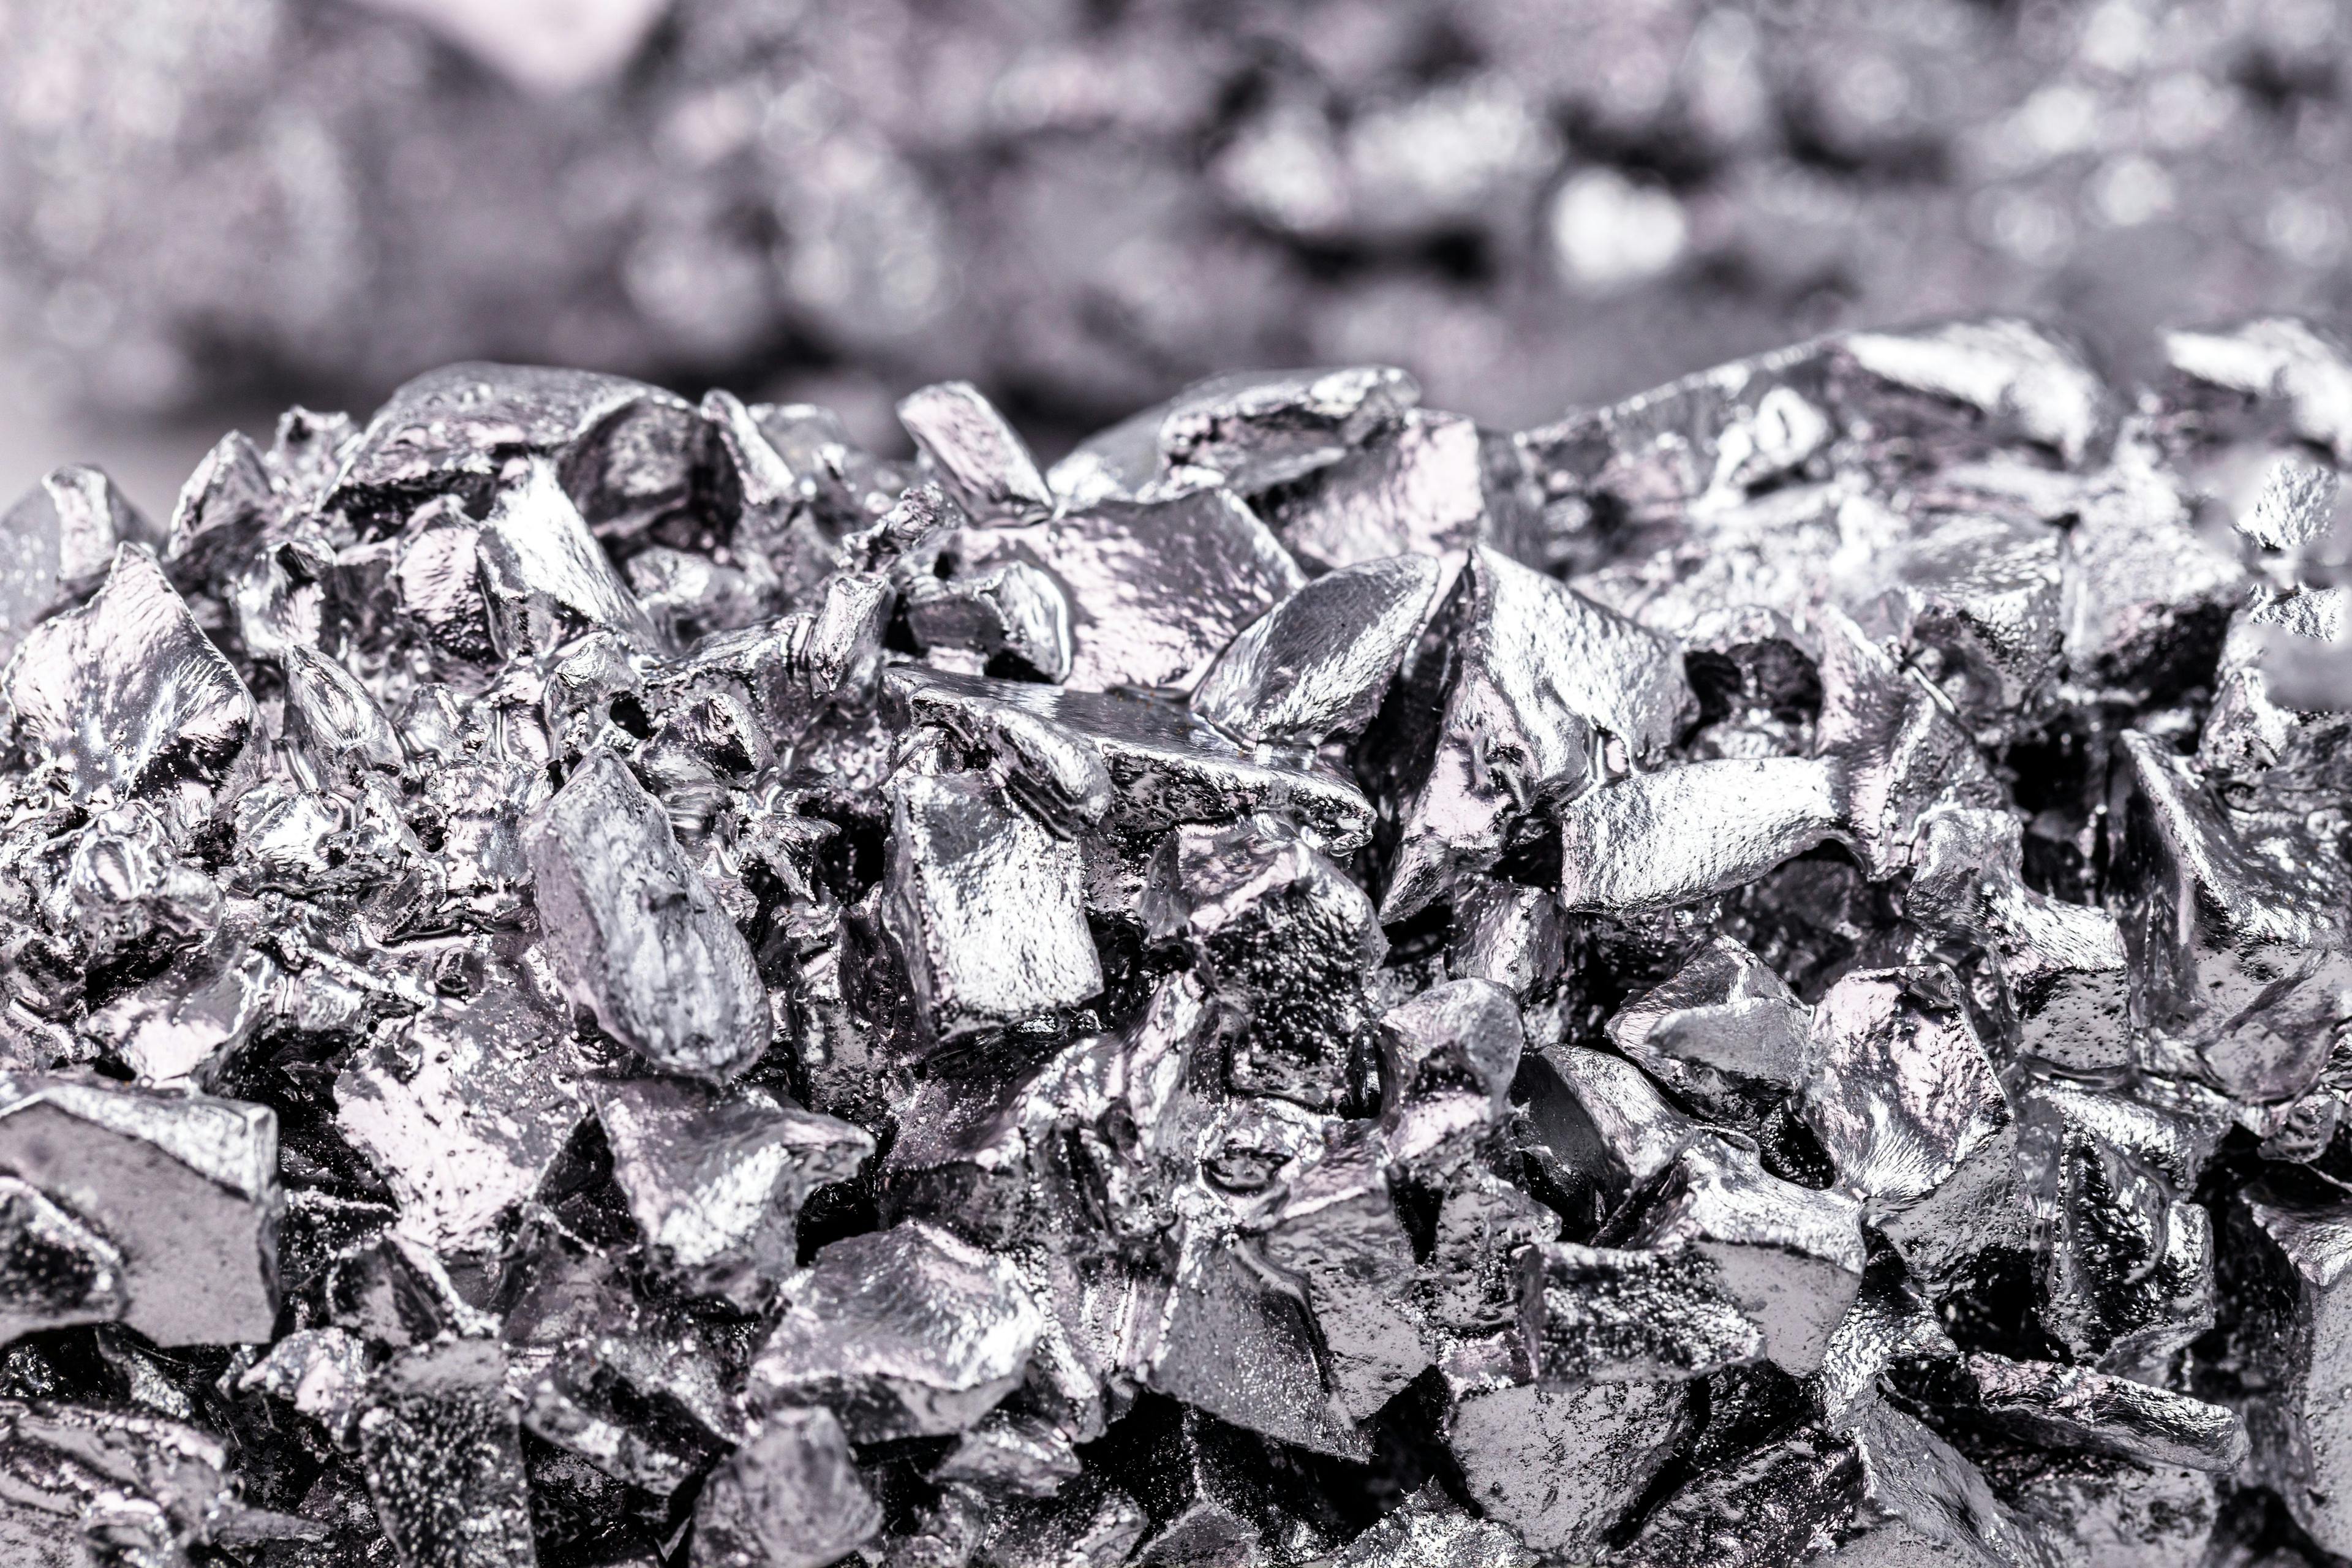 titanium metal alloy, used in the industry, titanium is a transition metal that adds value to metal alloys because it is light and resistant | Image Credit: © RHJ - stock.adobe.com